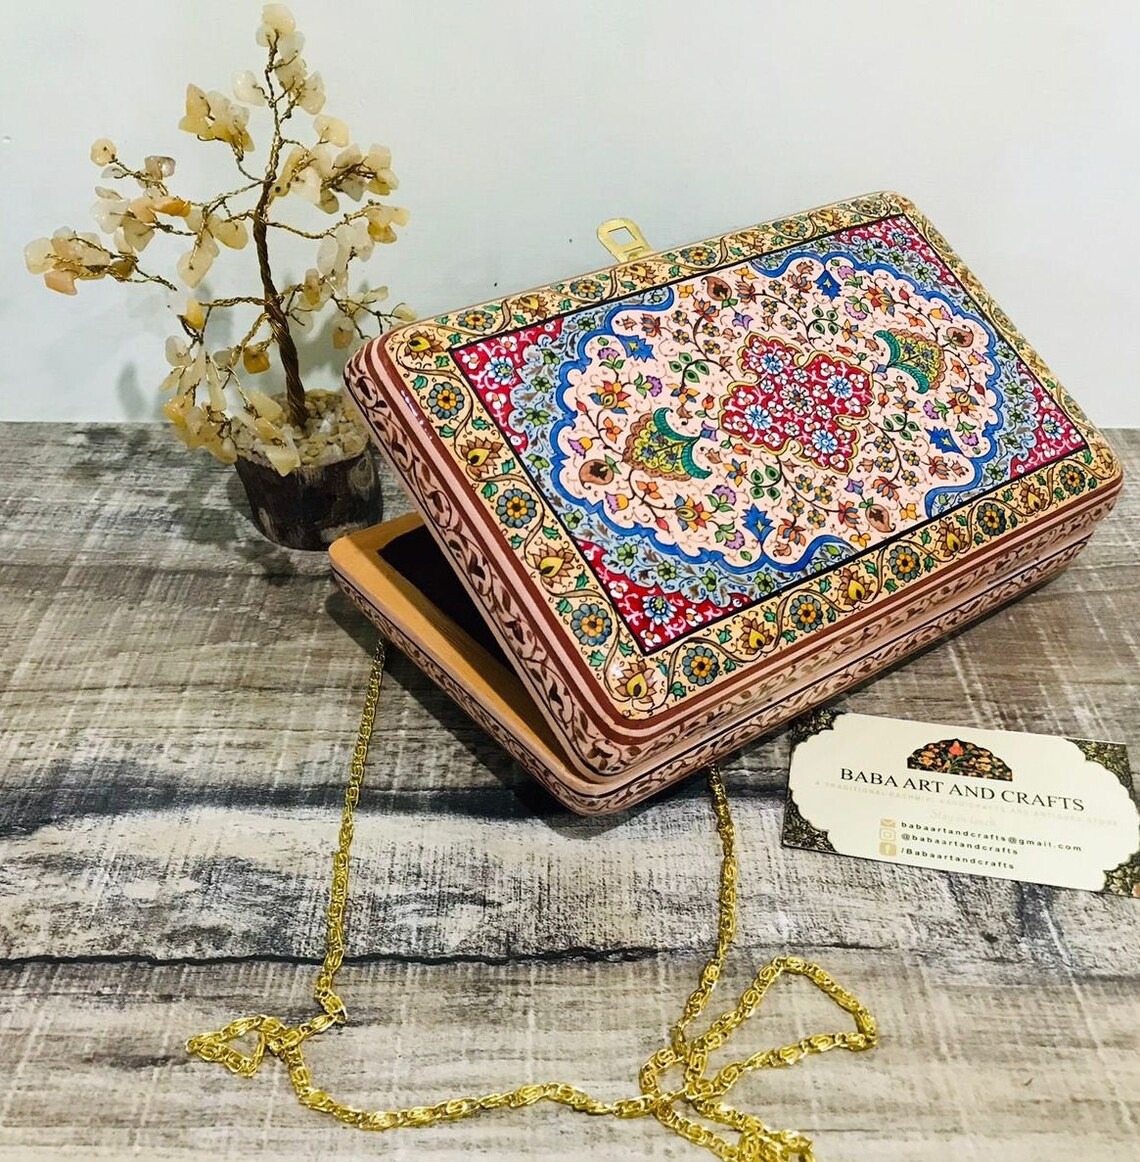 Boho Wallets, Luxury bags, Clutches with hand painted paper mache art, Papier mache clutches from Kashmir-